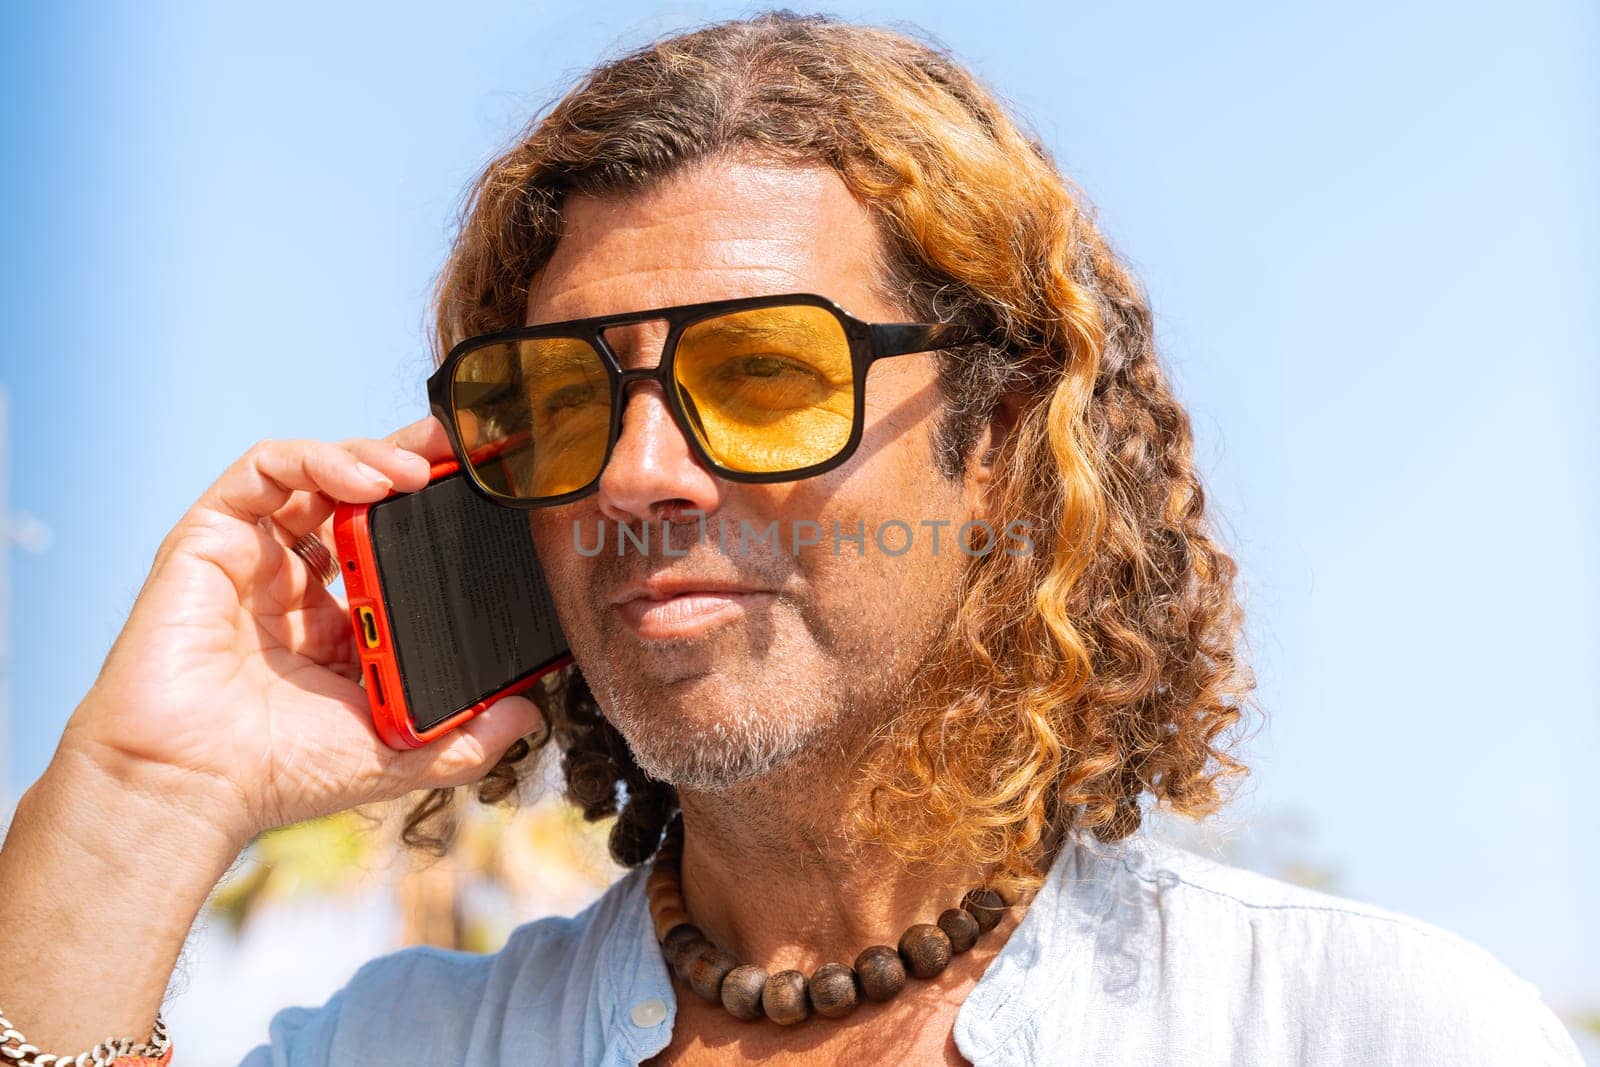 Caucasian man wearing sunglasses talks on cell phone and smiles outdoors